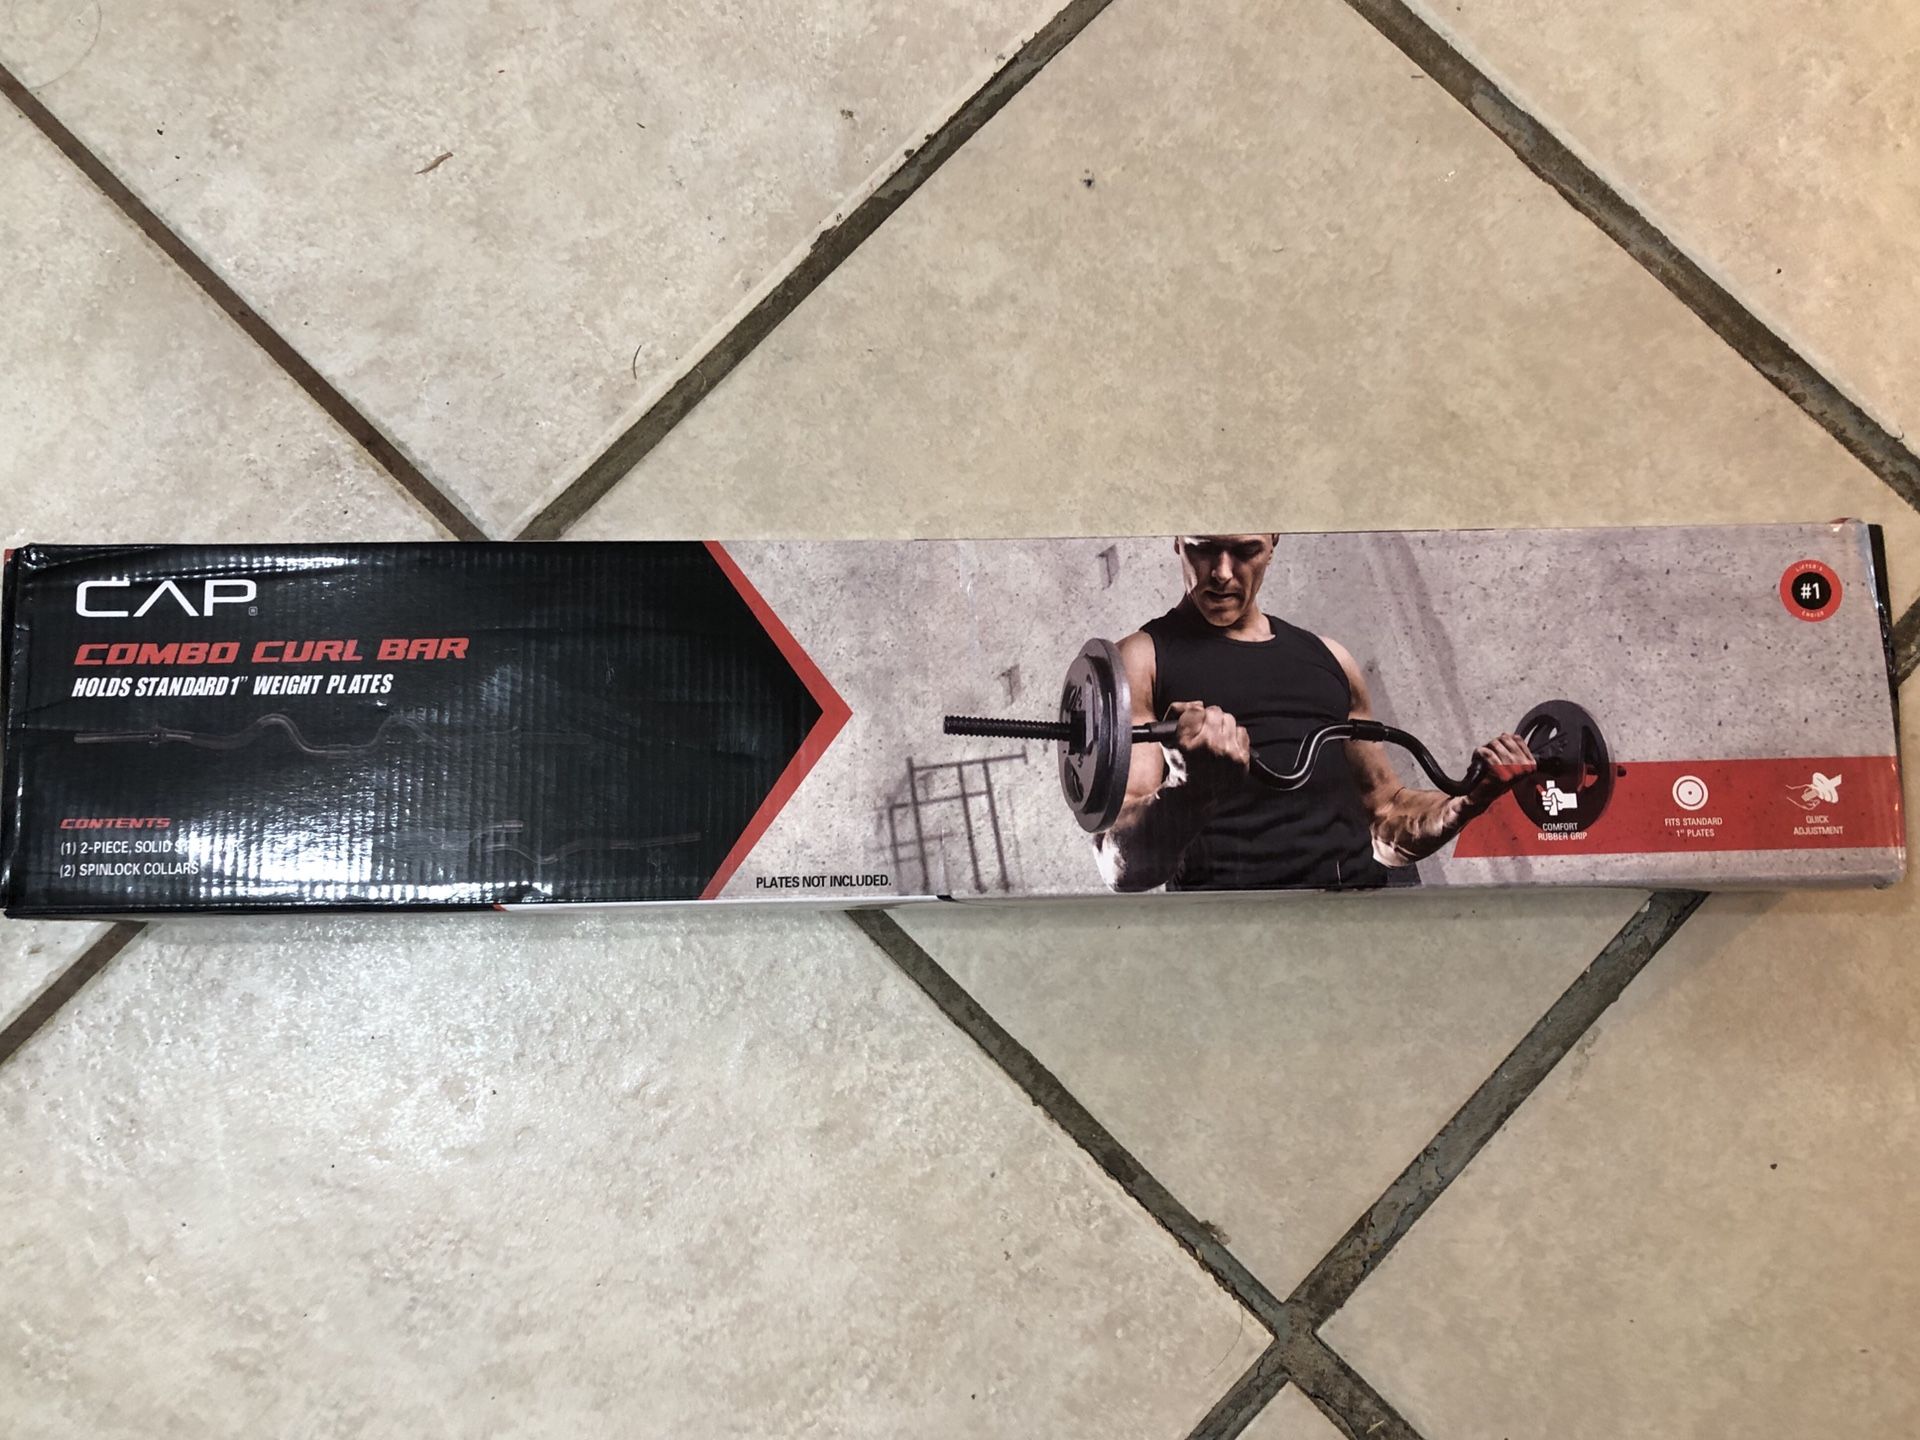 CAP Combo Curl Bar Holds Standard 1” Weight Lifting Plates - Brand New